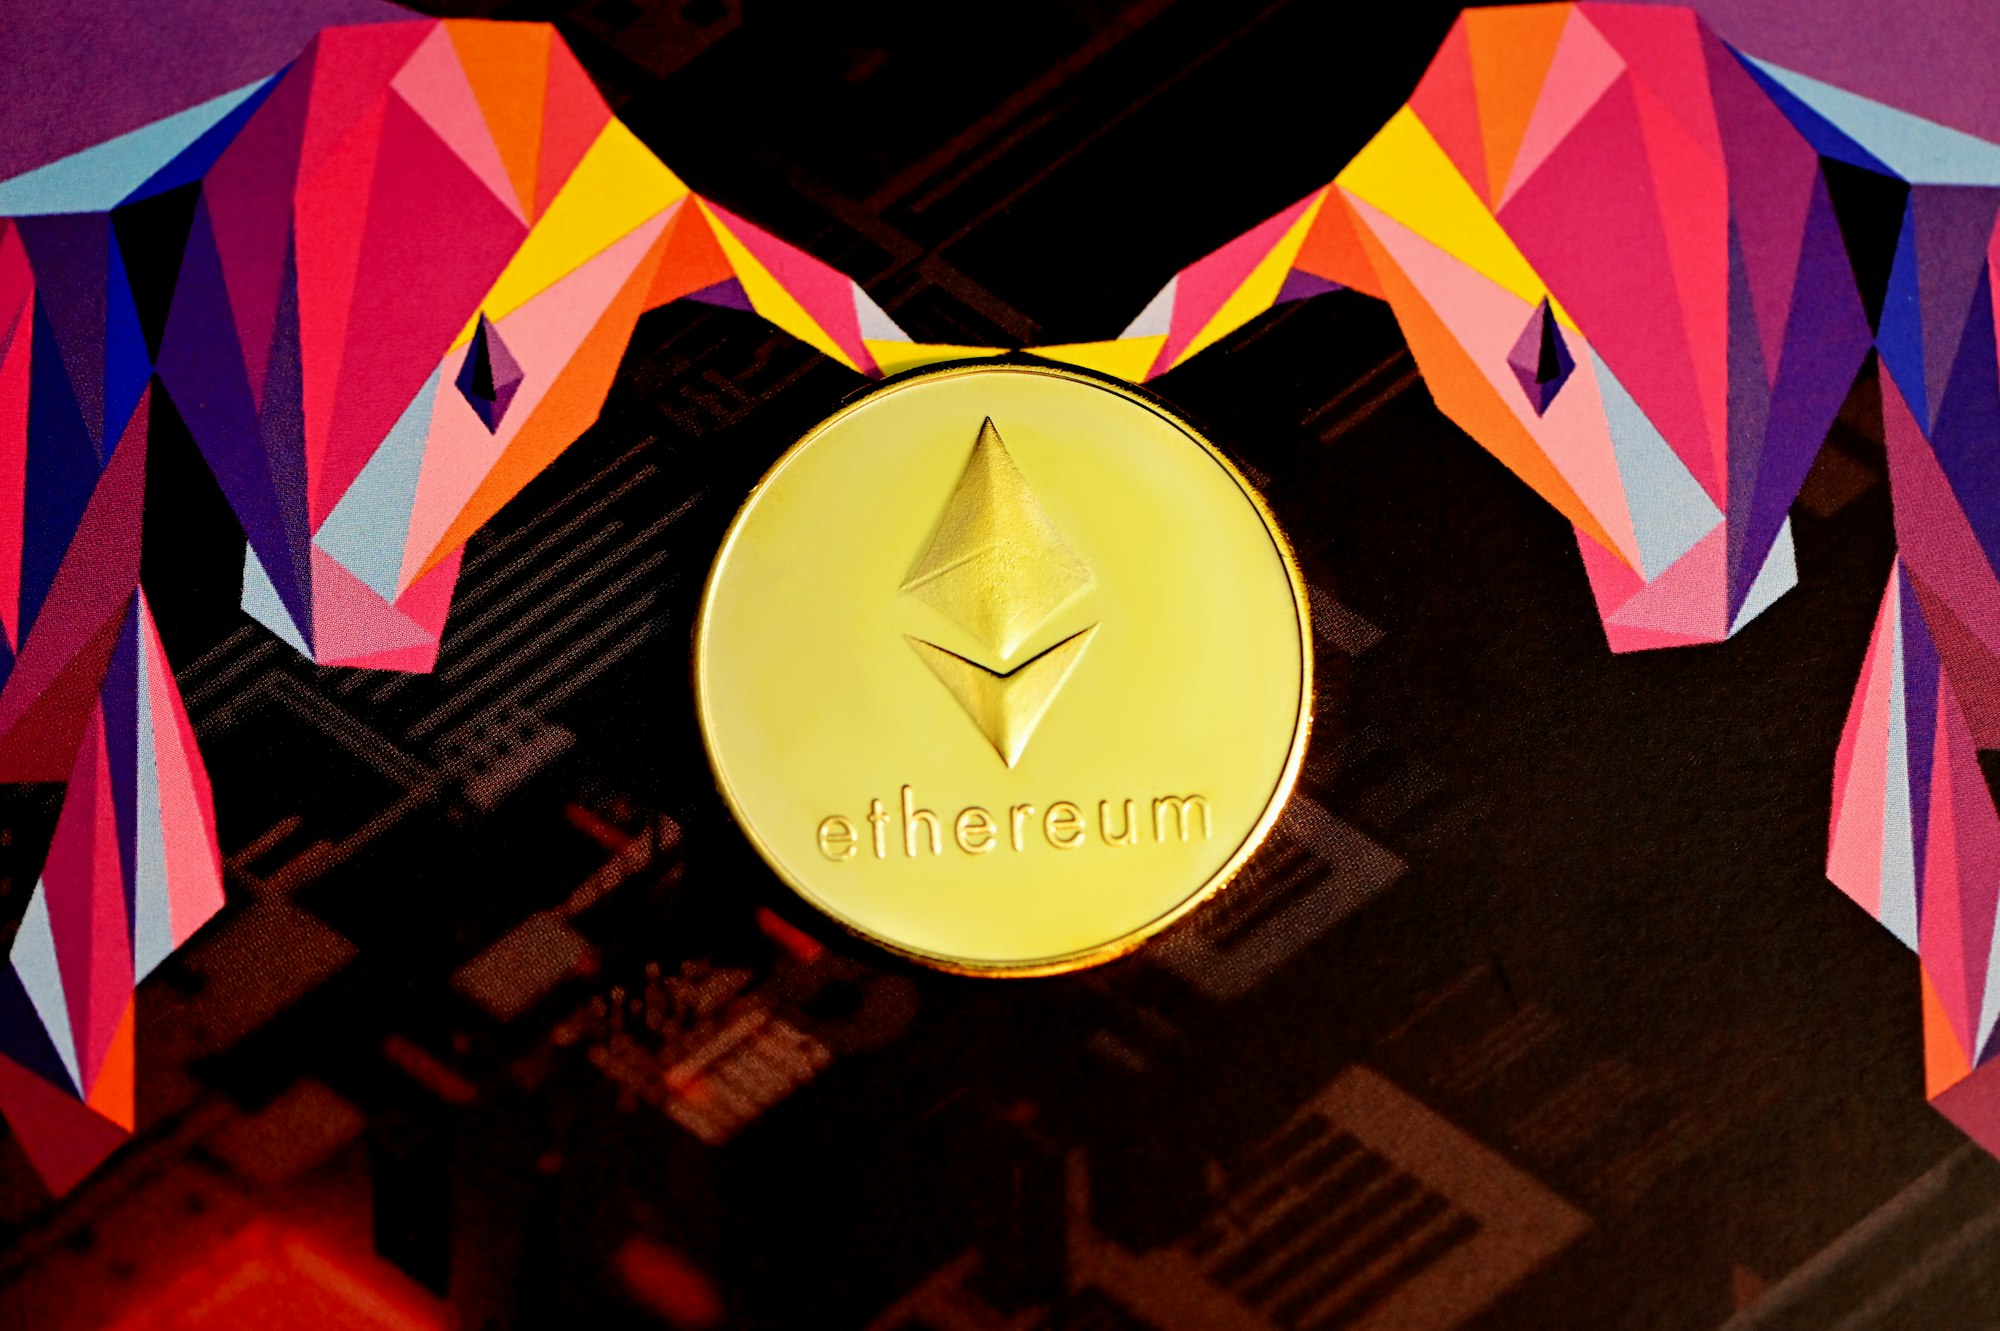 An Ethereum coin in between two executium bull logo.